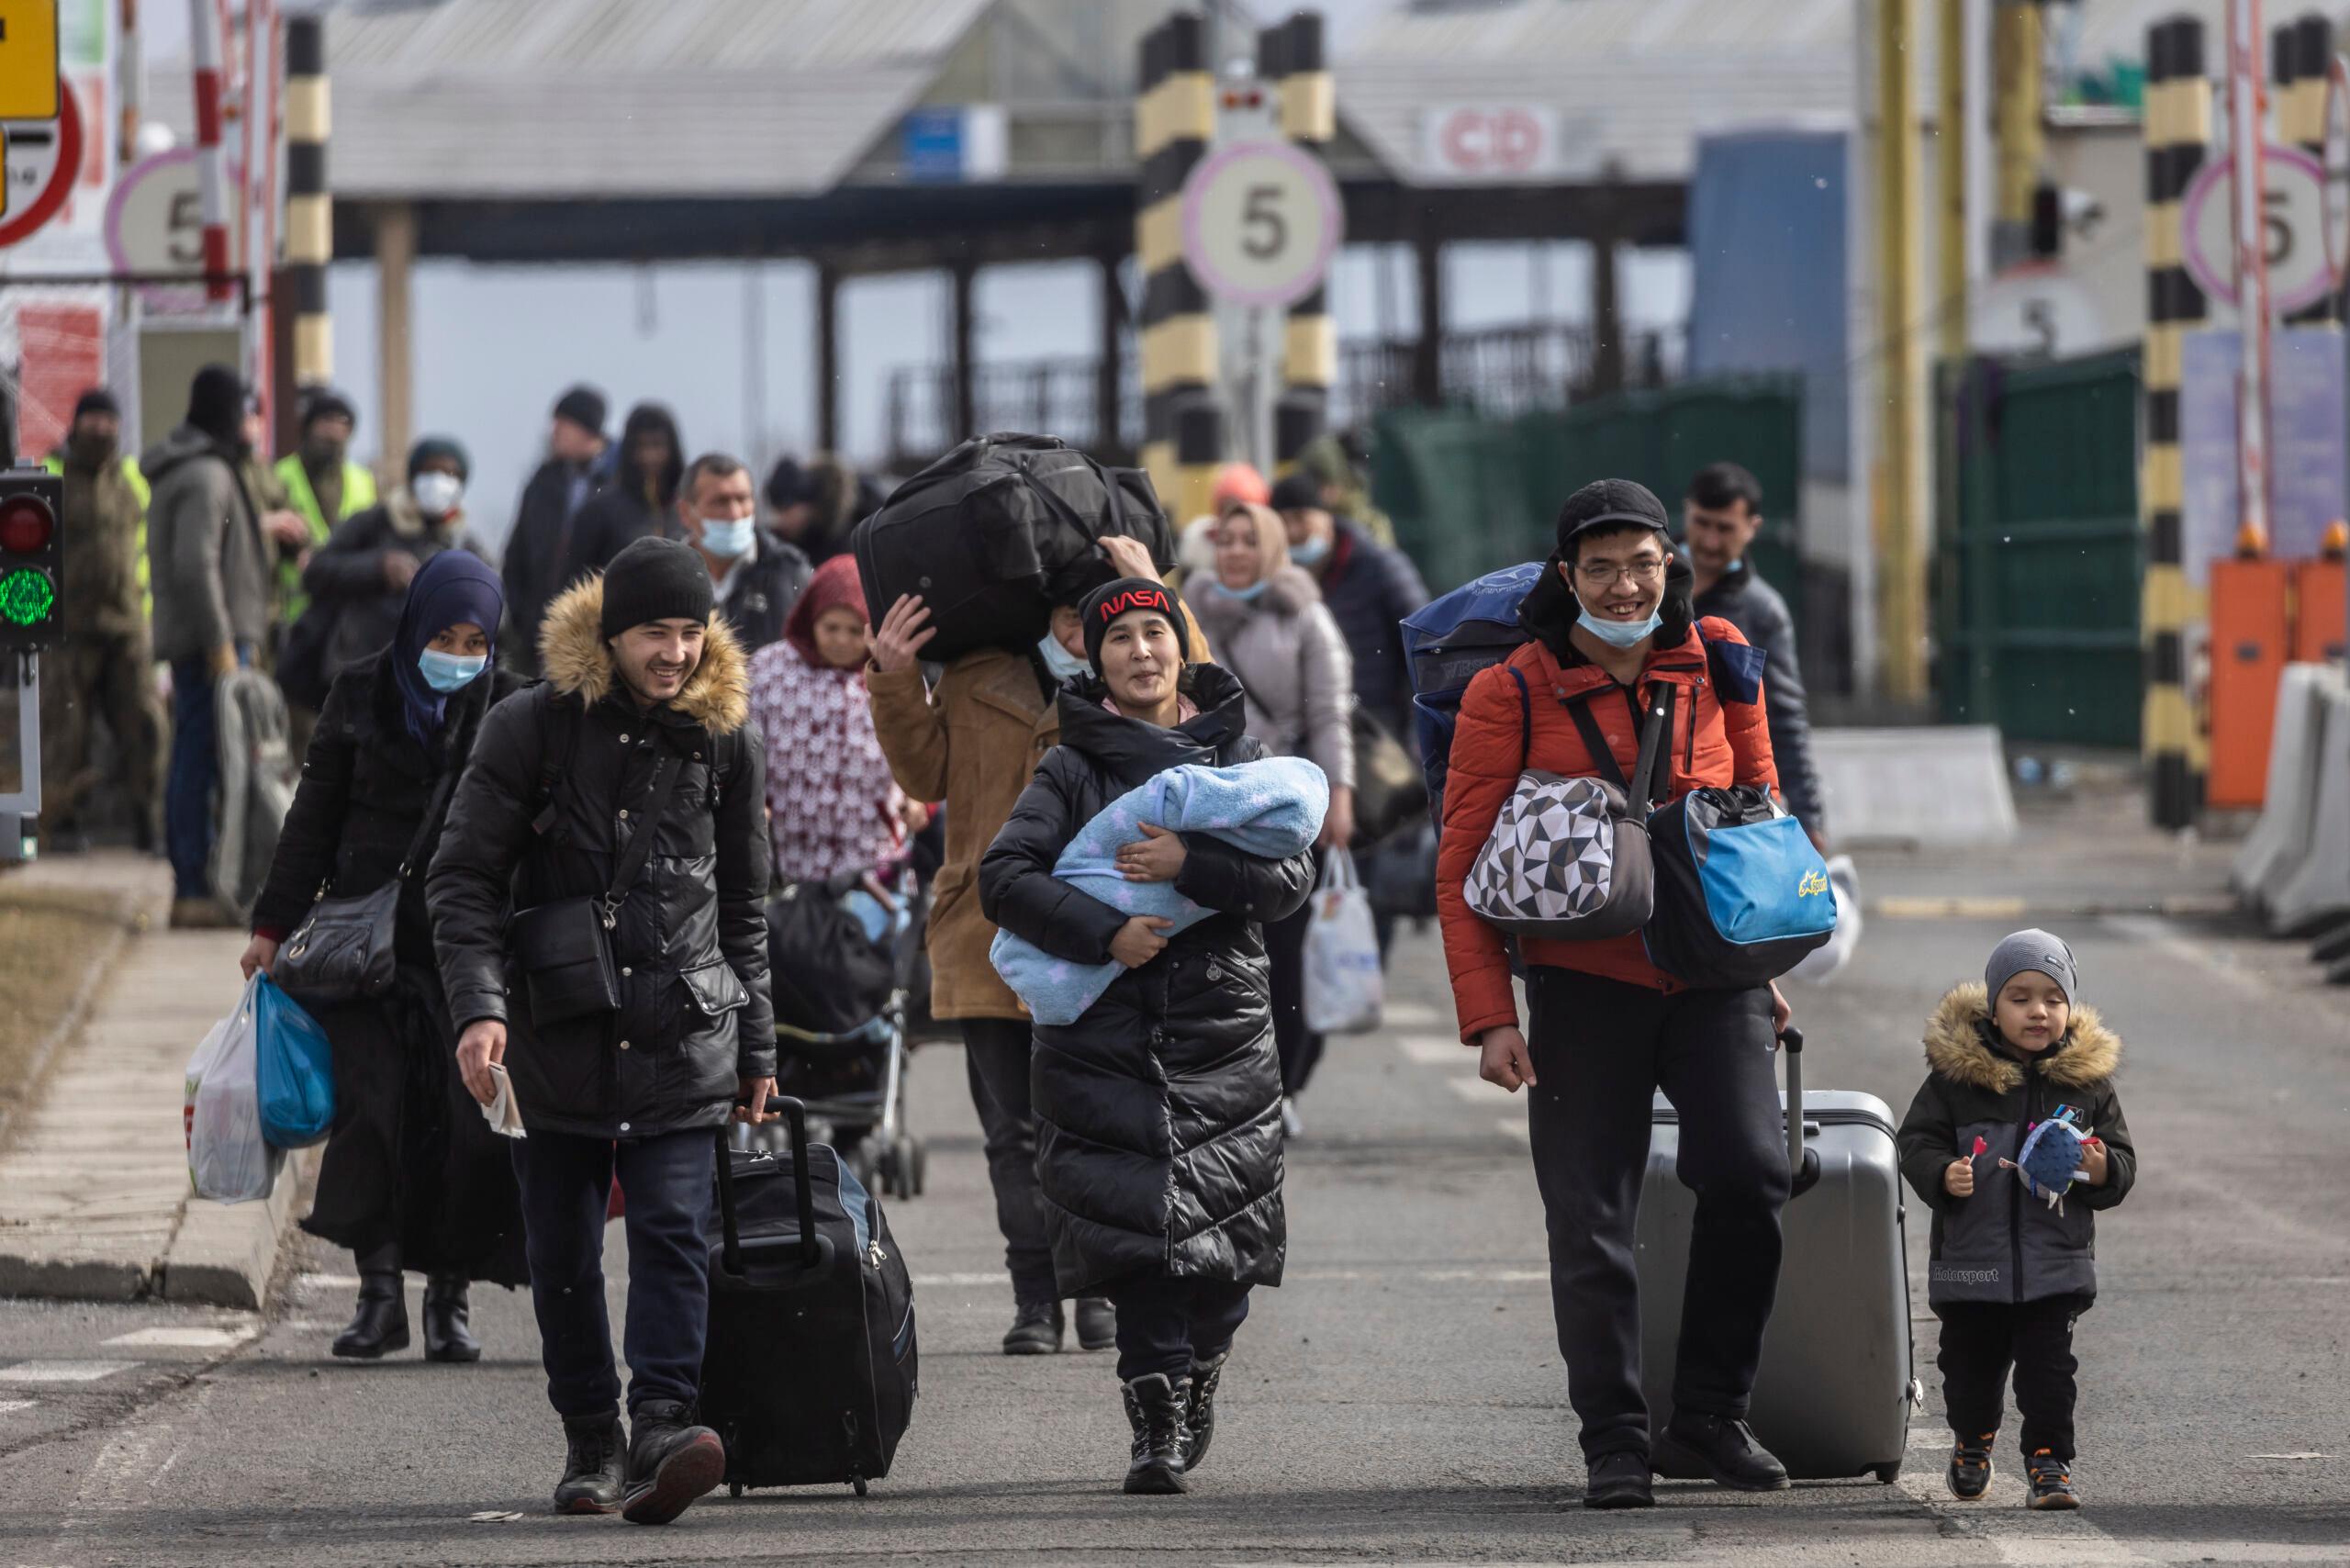 Refugees from Ukraine are seen as they arrive at the border crossing in Korczowa, Poland, March 2, 2022. - The number of refugees fleeing the conflict in Ukraine has surged to nearly 836,000, United Nations figures showed on March 2, 2022, as fighting intensified on day seven of Russia's invasion. (Photo by Wojtek RADWANSKI / AFP)